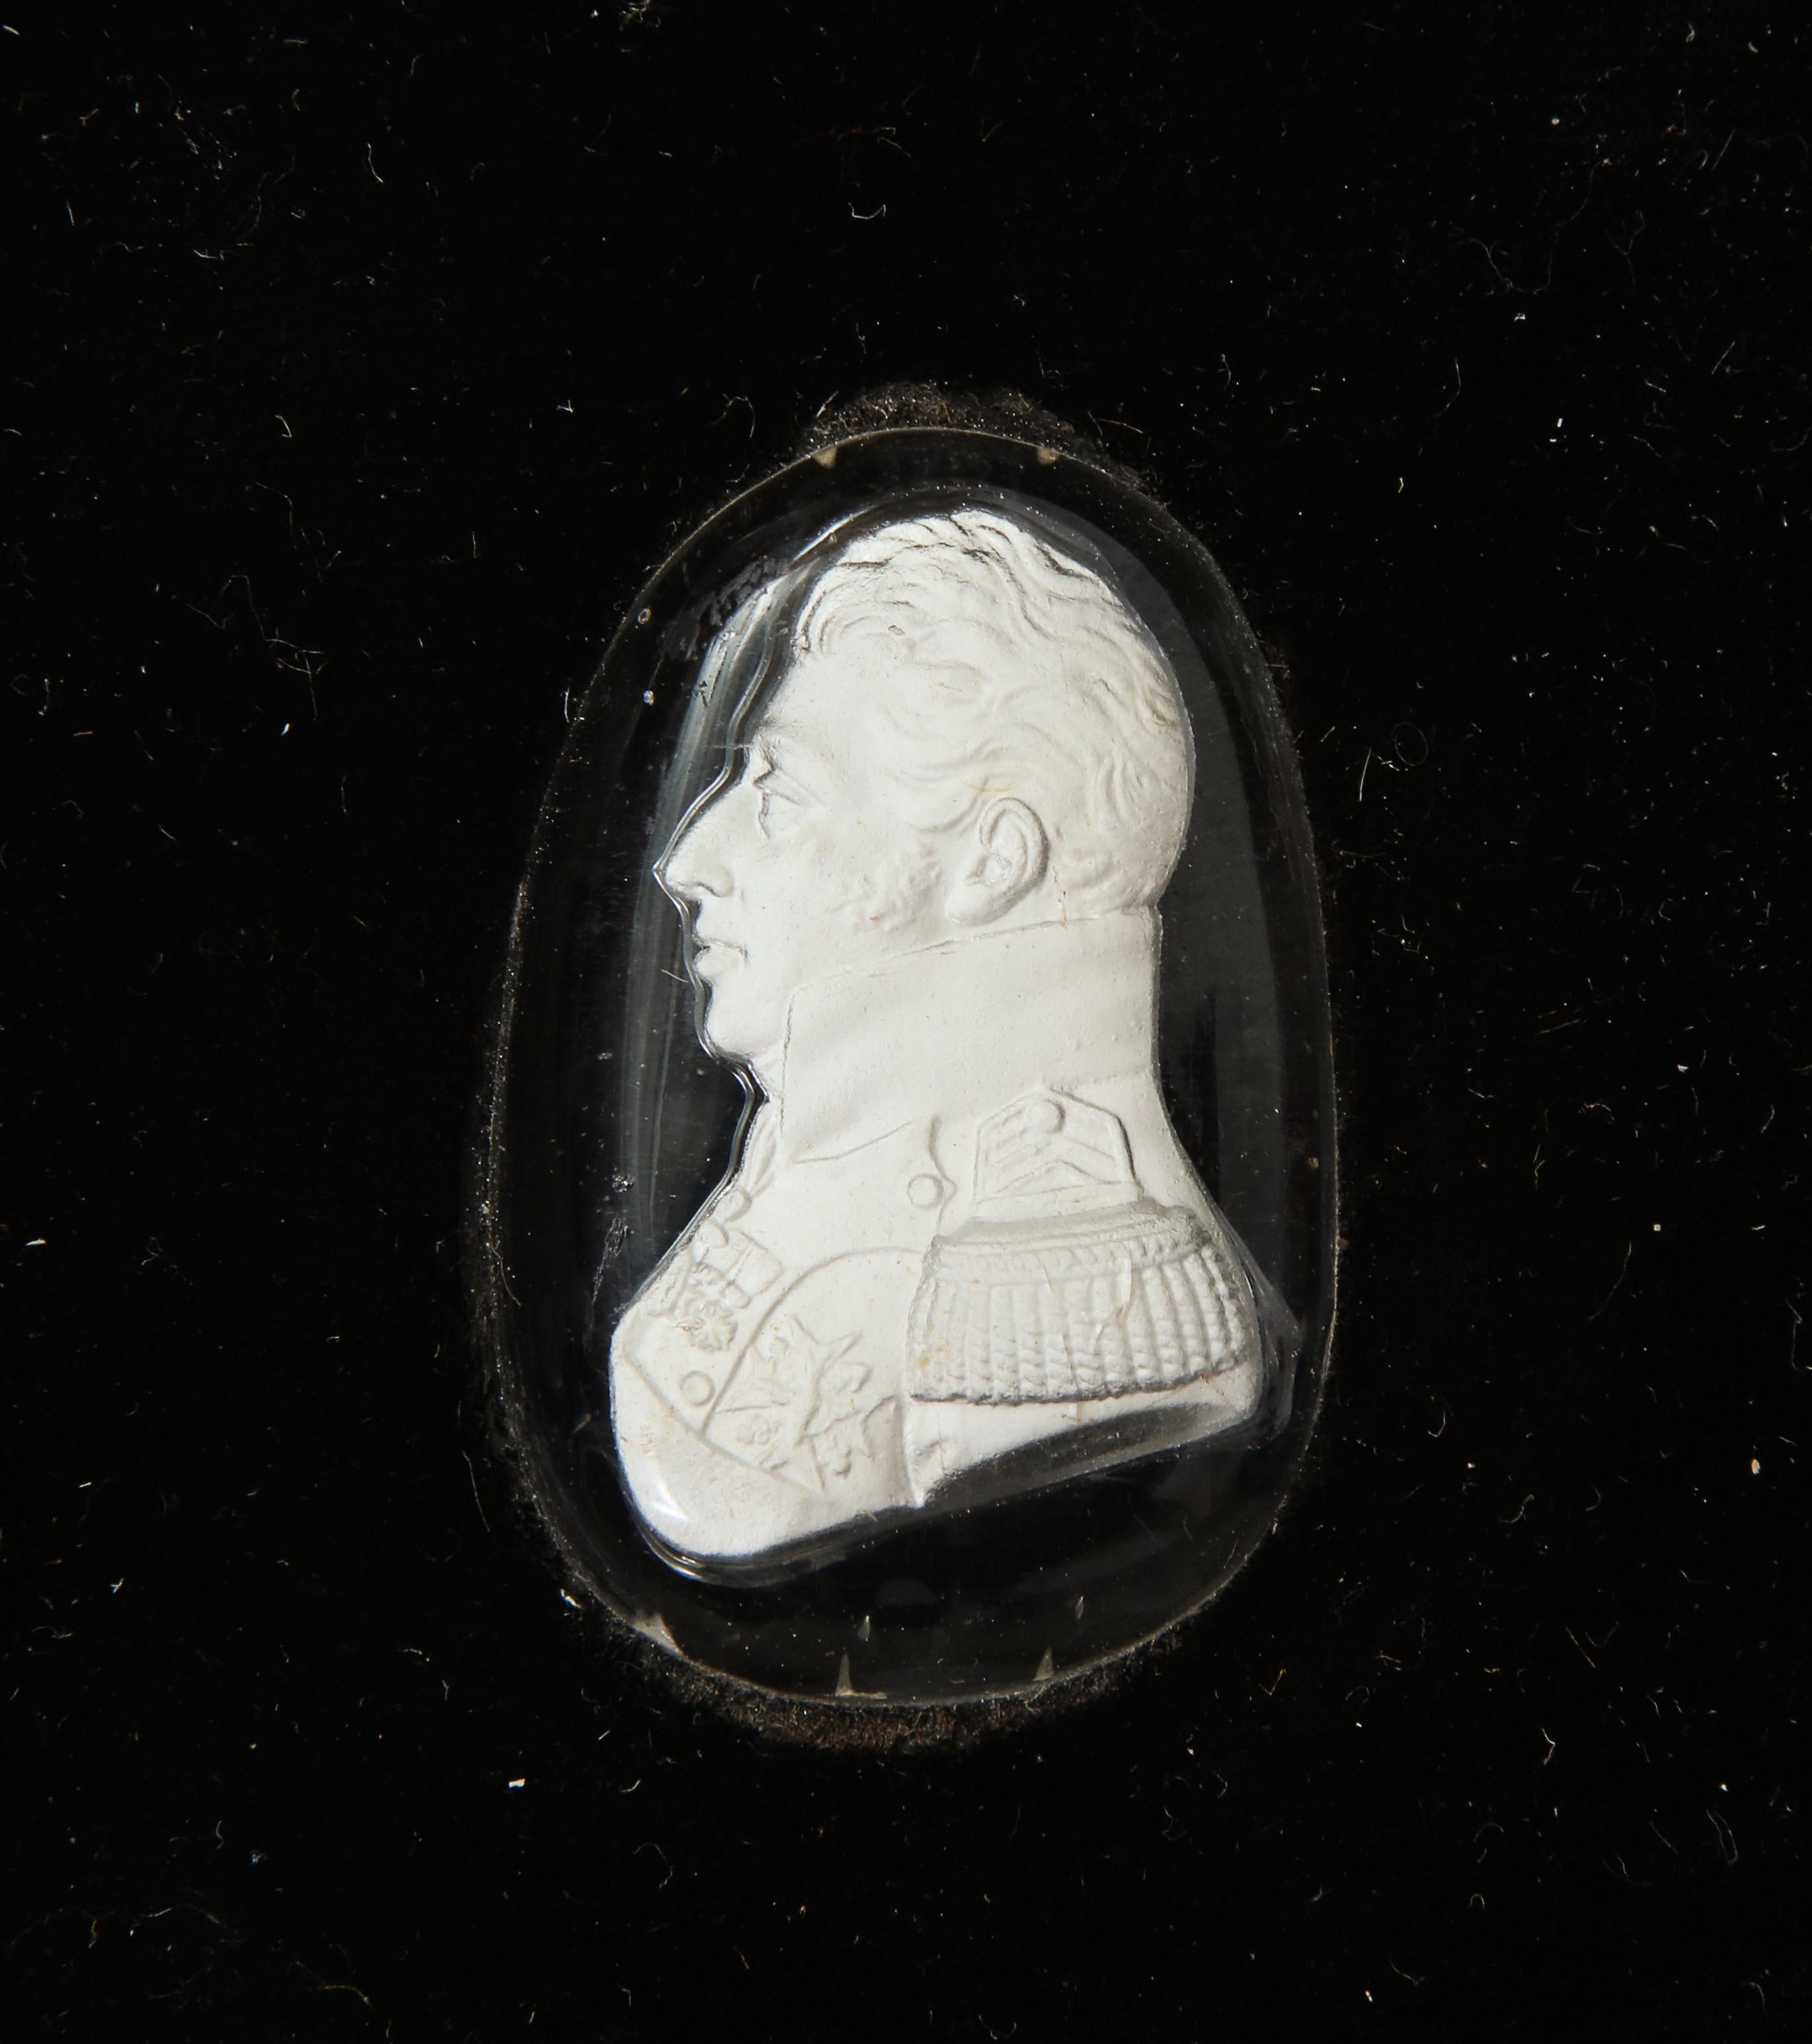 19th century English reverse-carved portrait in opaline glass with the original black leather frame.